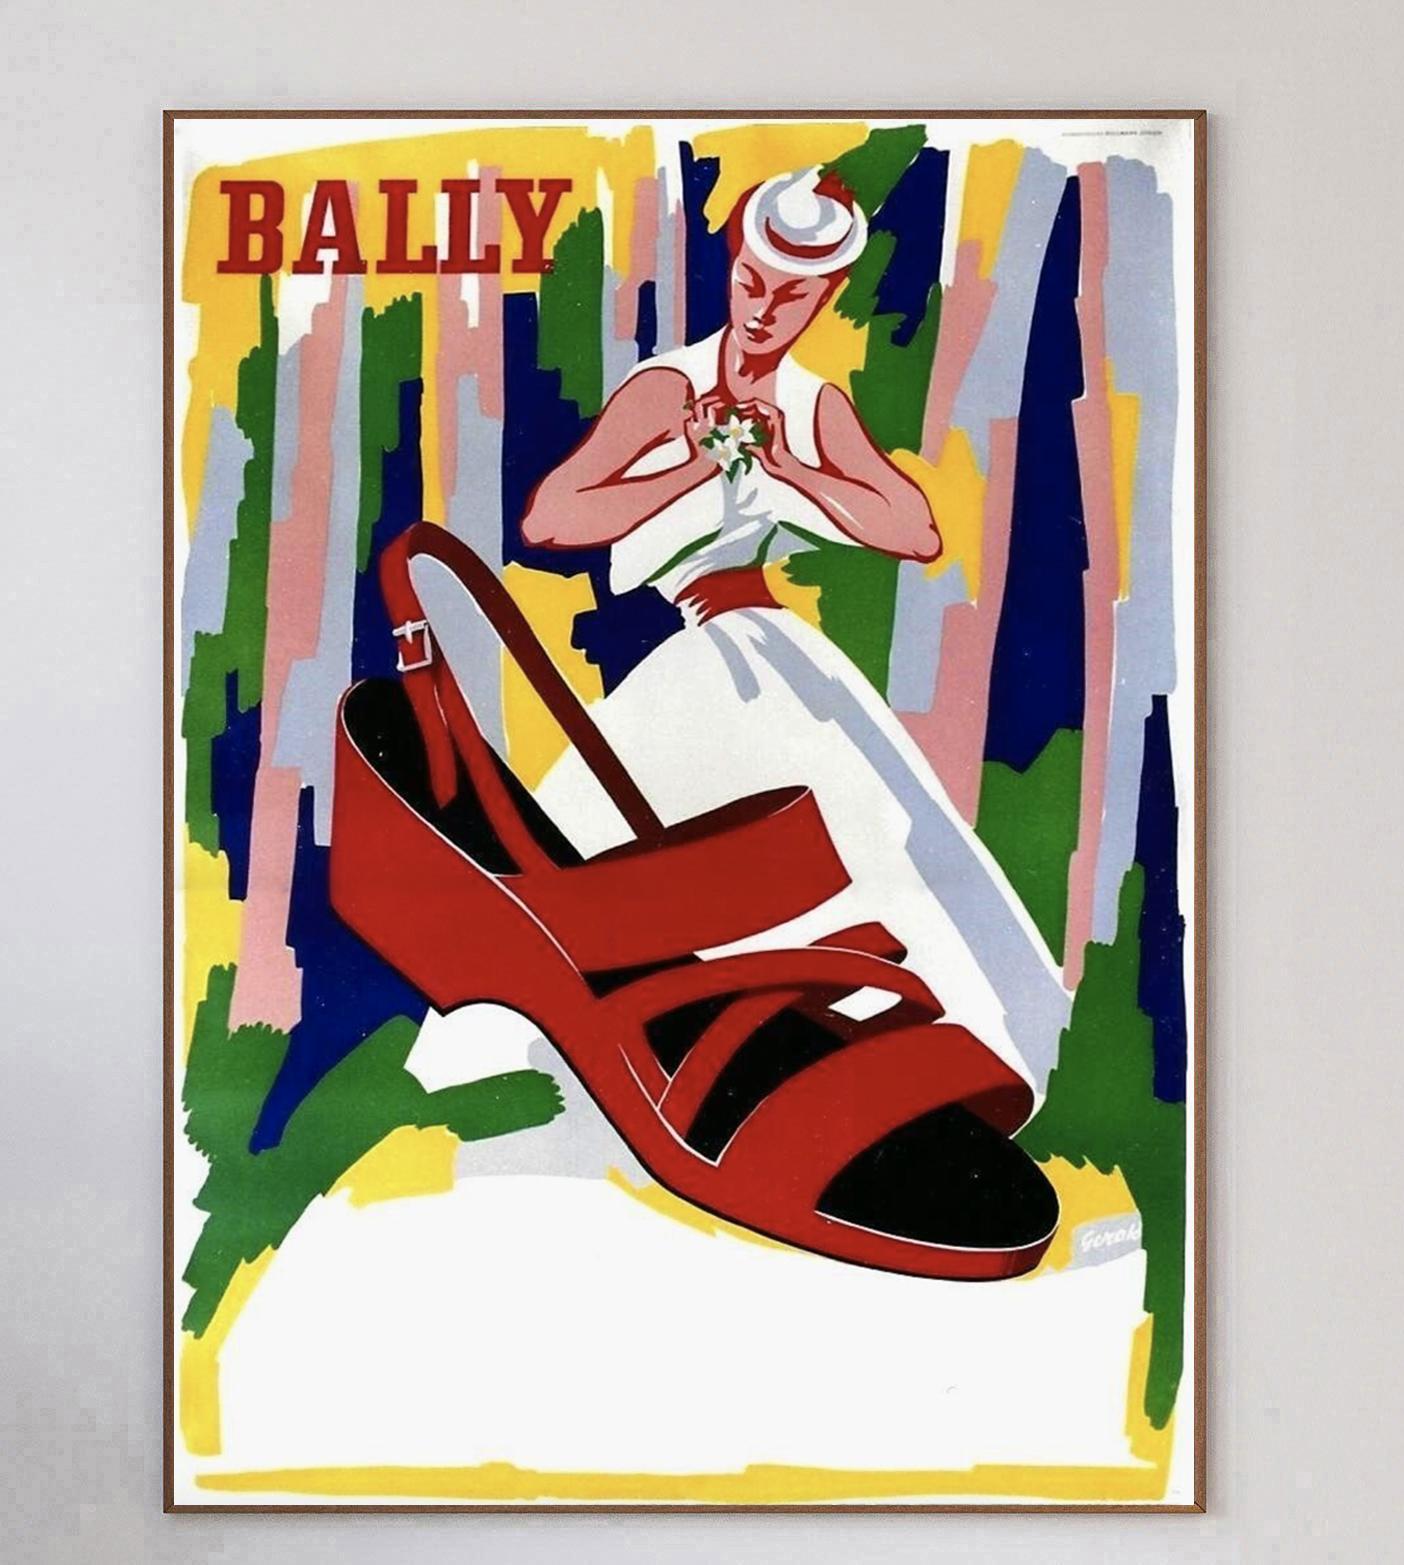 One of the most iconic and sought after designs of the 20th century, the poster designs of bally showcase the crossover between advertisement and fine art.
The luxury Swiss Shoemaker worked with a range of esteemed poster artists such as Bernard